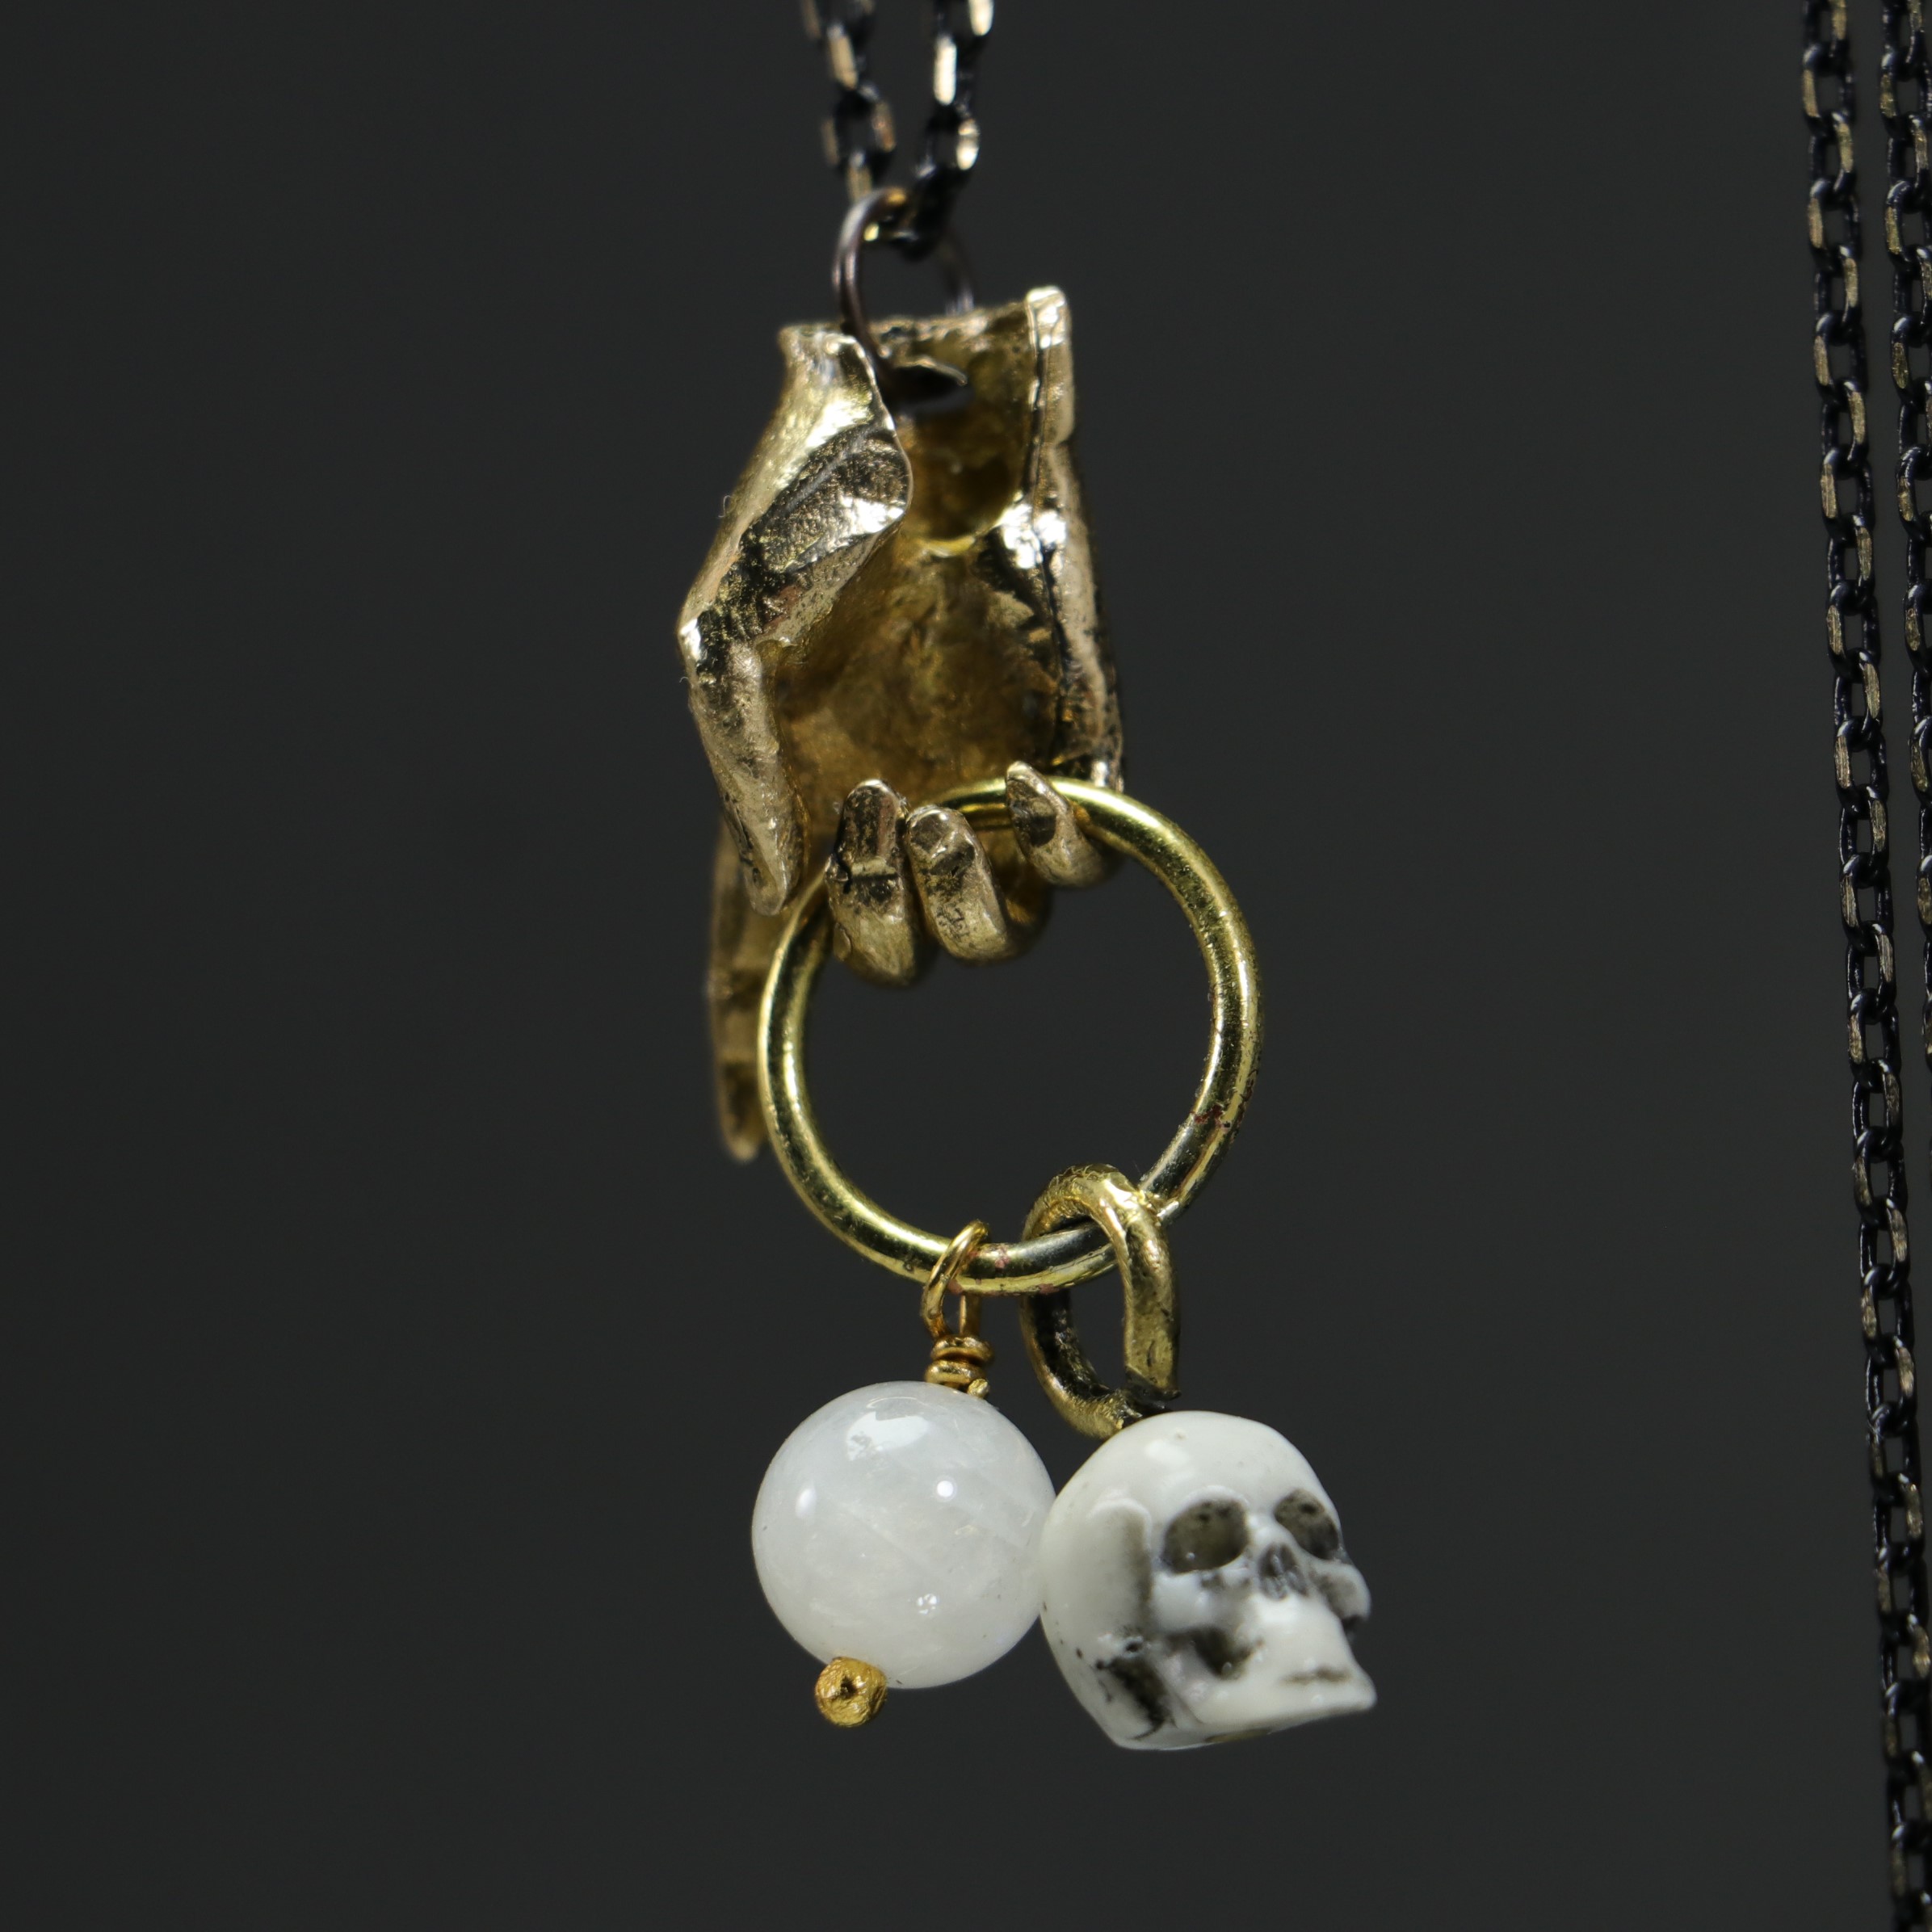 Hand and Skull Moonstone Necklace